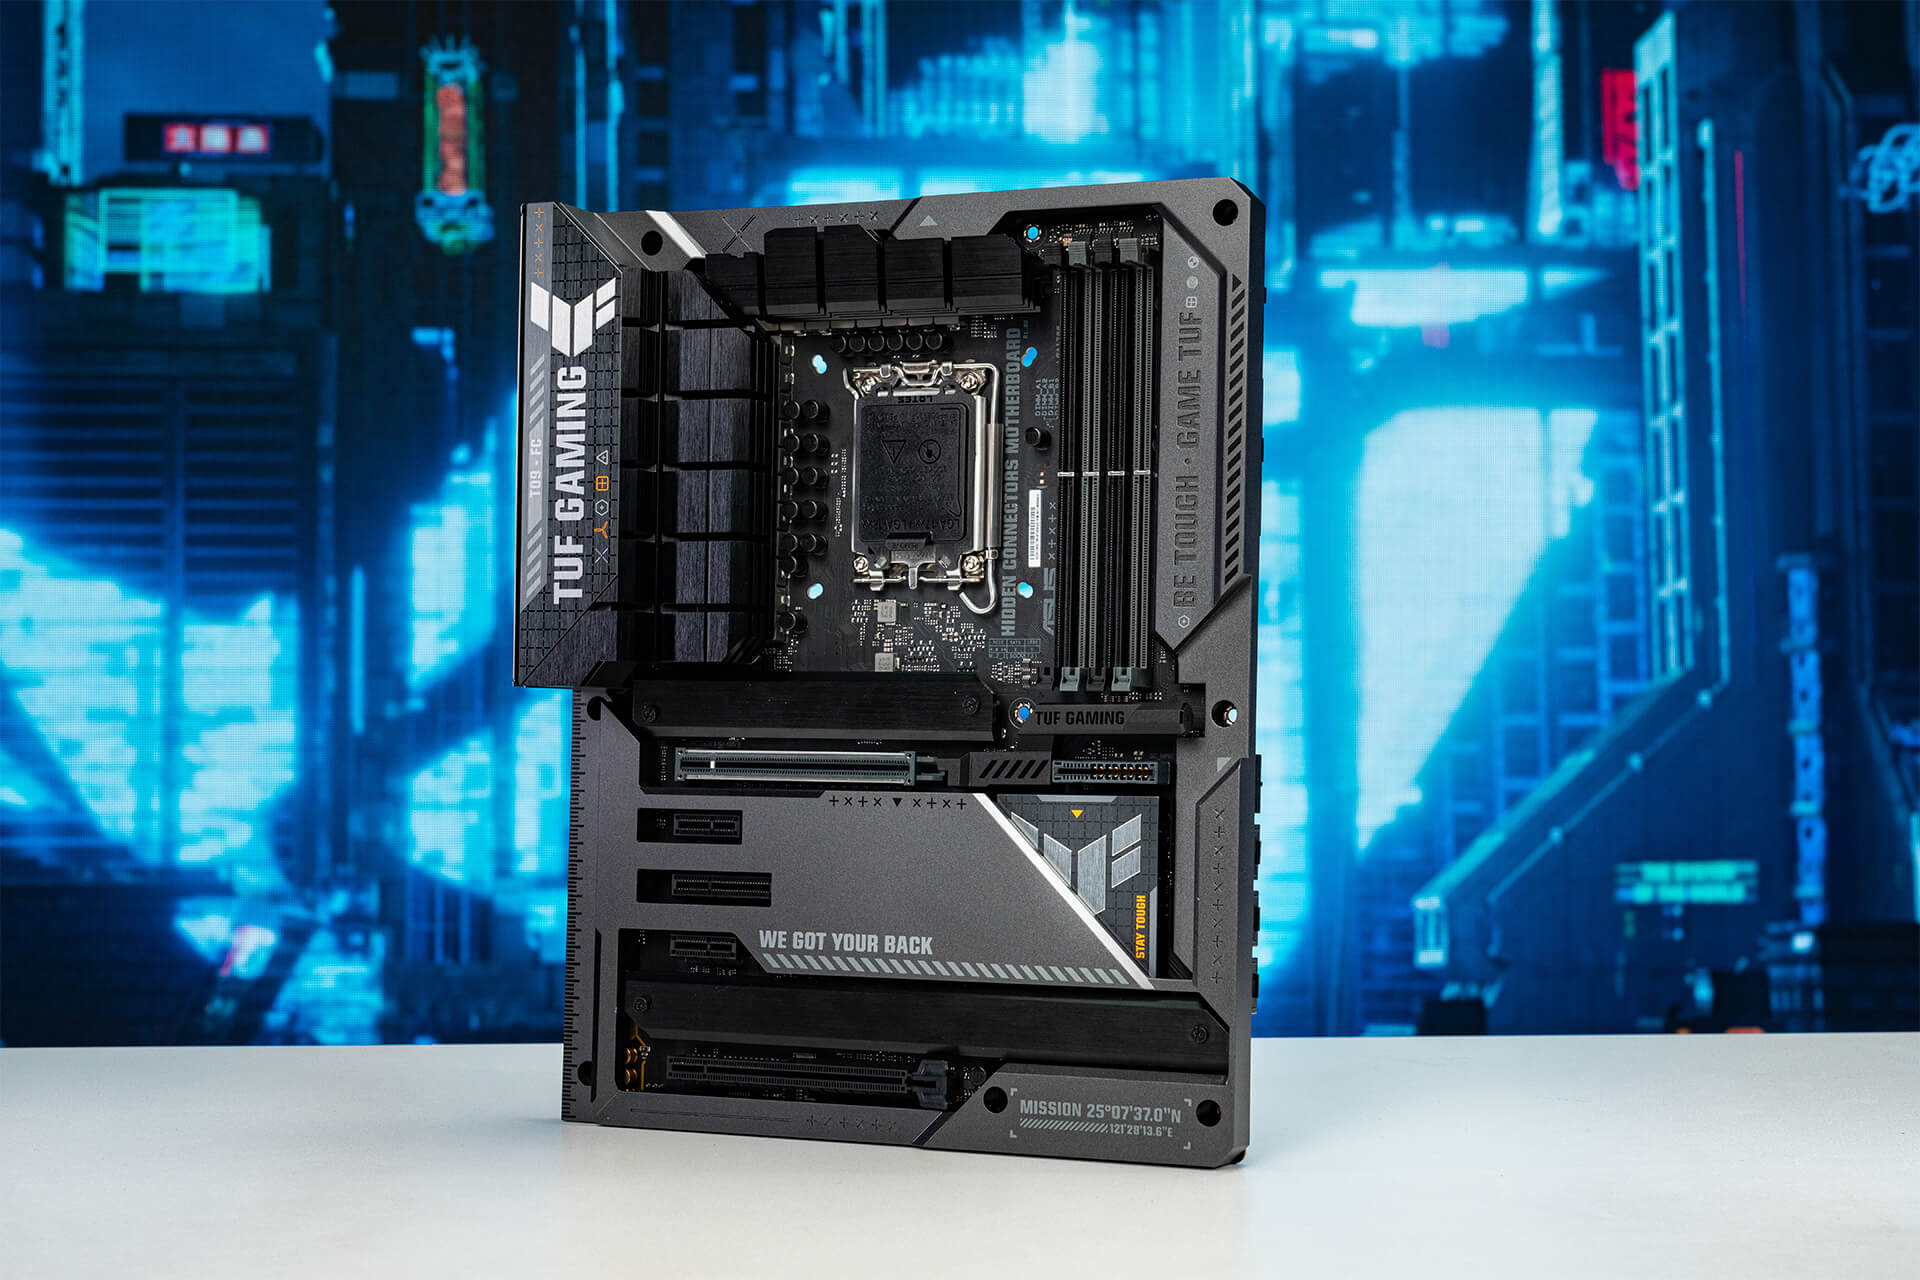 A 45˚ angle of TUF GAMING Z790 concept motherboard stands in the middle with blue background.